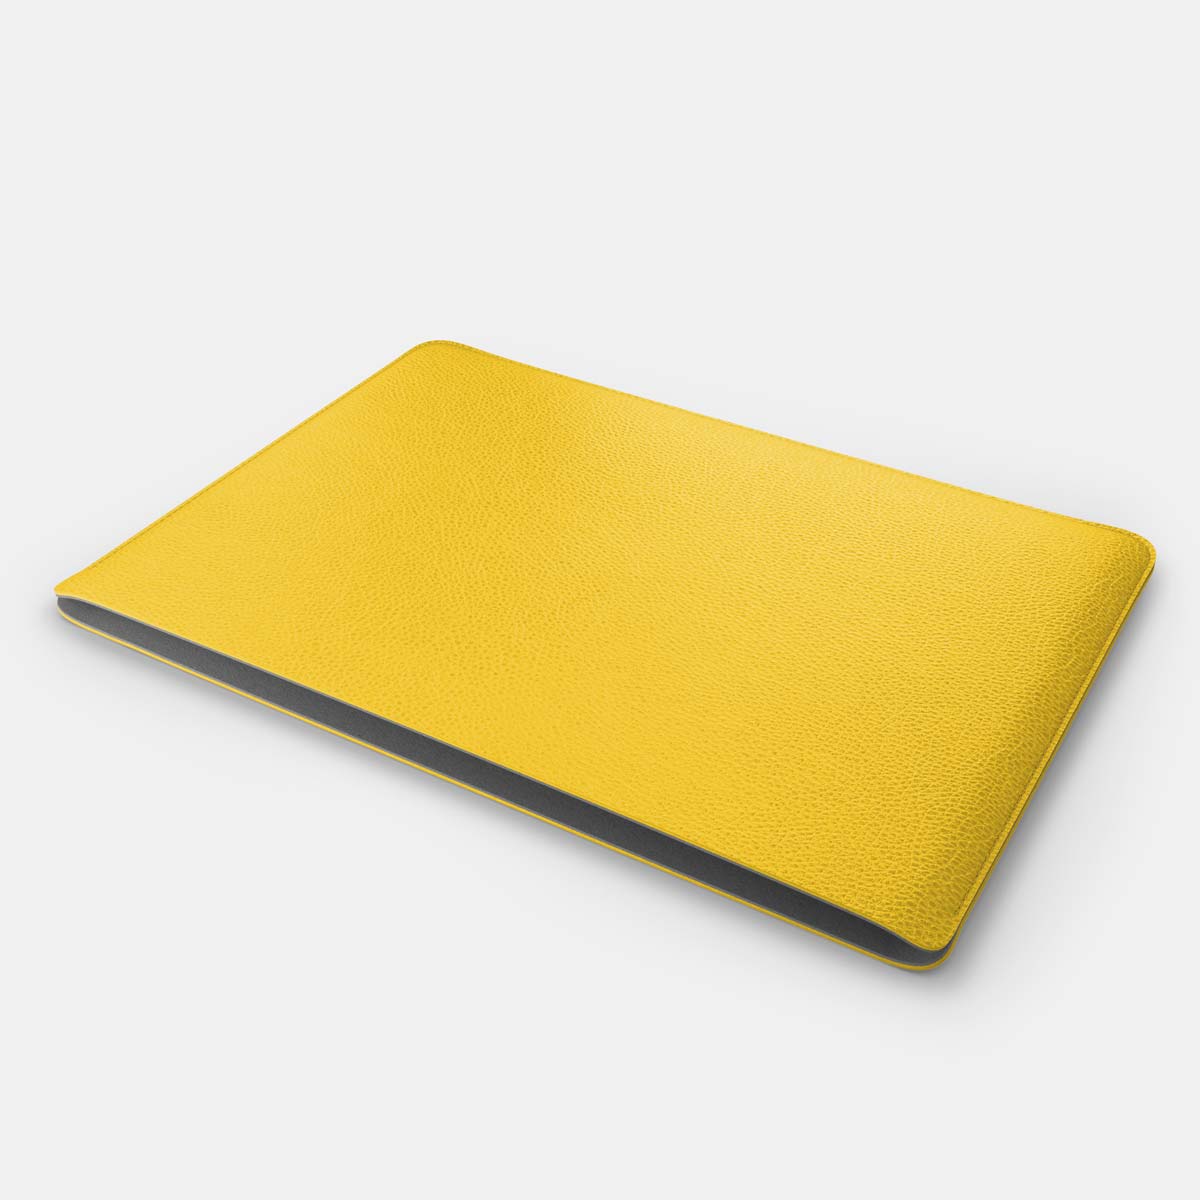 Luxury Leather Macbook Air 13" Sleeve - Yellow and Grey